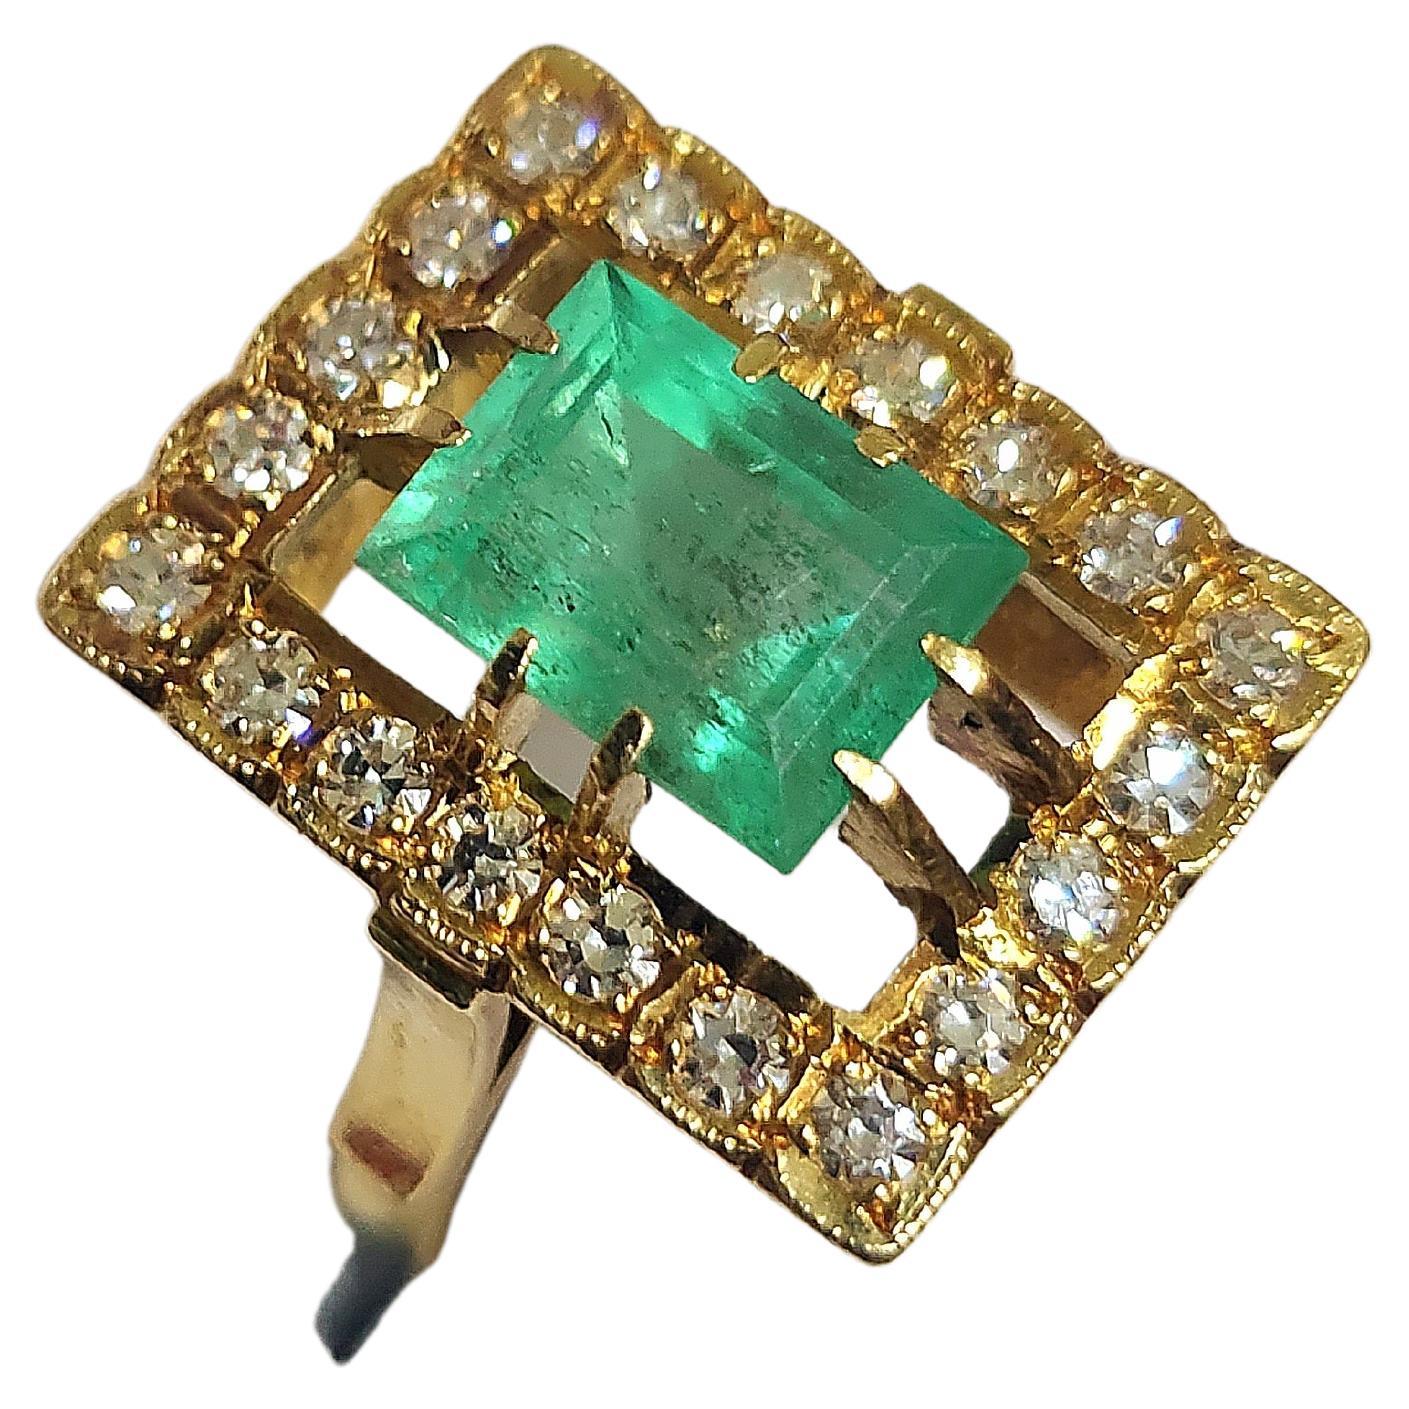 Vintage soviet union era 1960/1970s 14k yellow gold ring centered with natural green emerald in emerald cut estimate weight of 1.70 carats flanked with brilliant cut diamonds estimate weight 0.65 carats ring head diameter 13mm×18mm was made during